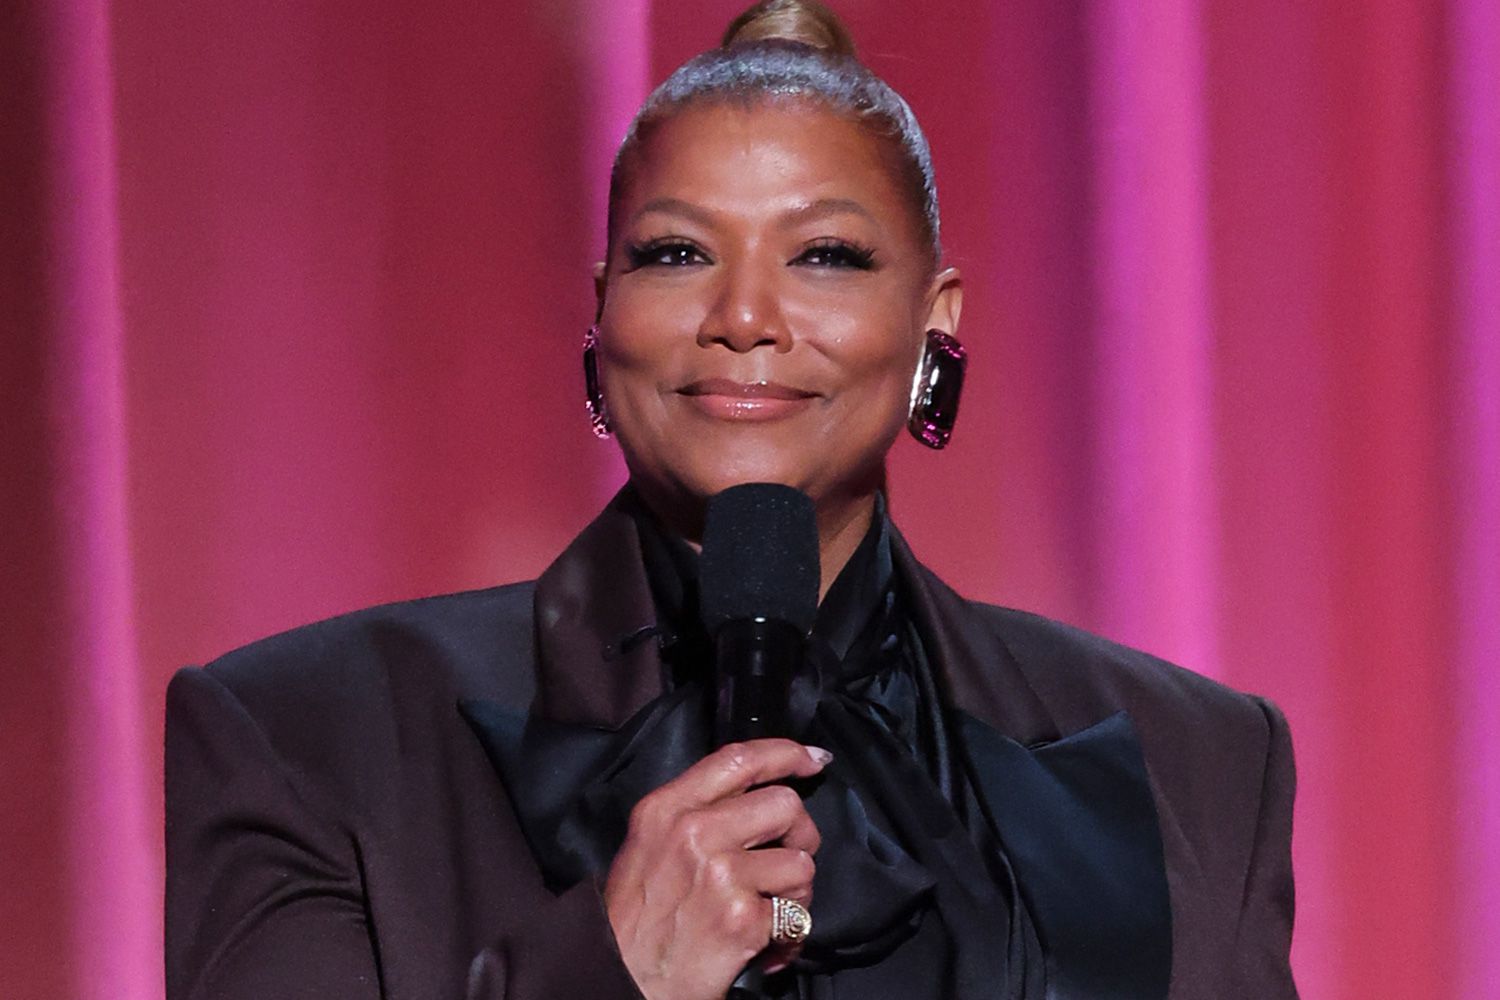 Queen Latifah at the 55th NAACP Image Awards held at The Shrine Auditorium 